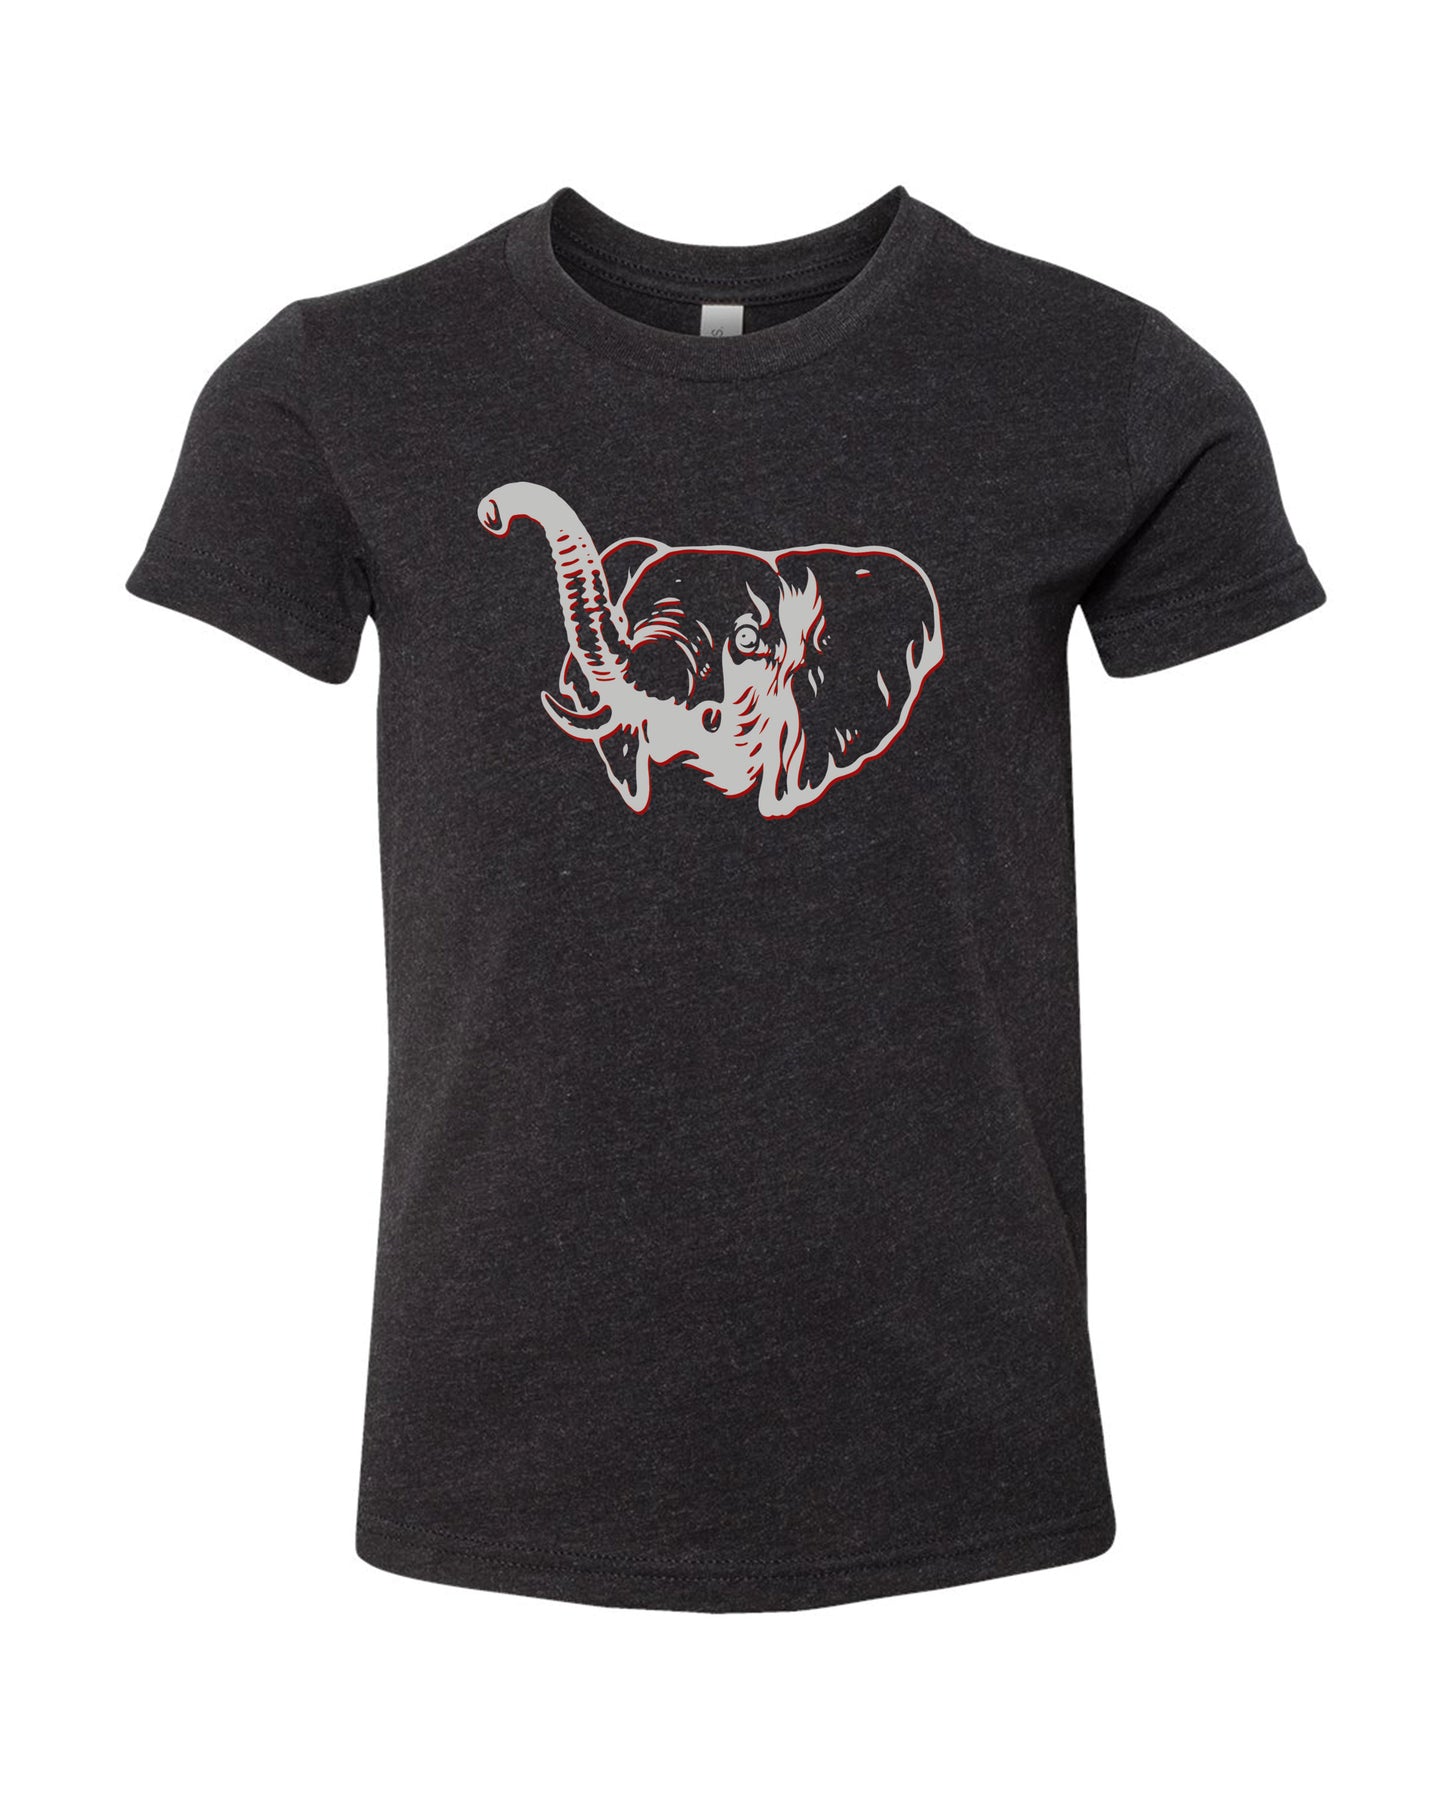 Sketch Elephant | Kids Tee | RTS-Kids Tees-Sister Shirts-Sister Shirts, Cute & Custom Tees for Mama & Littles in Trussville, Alabama.